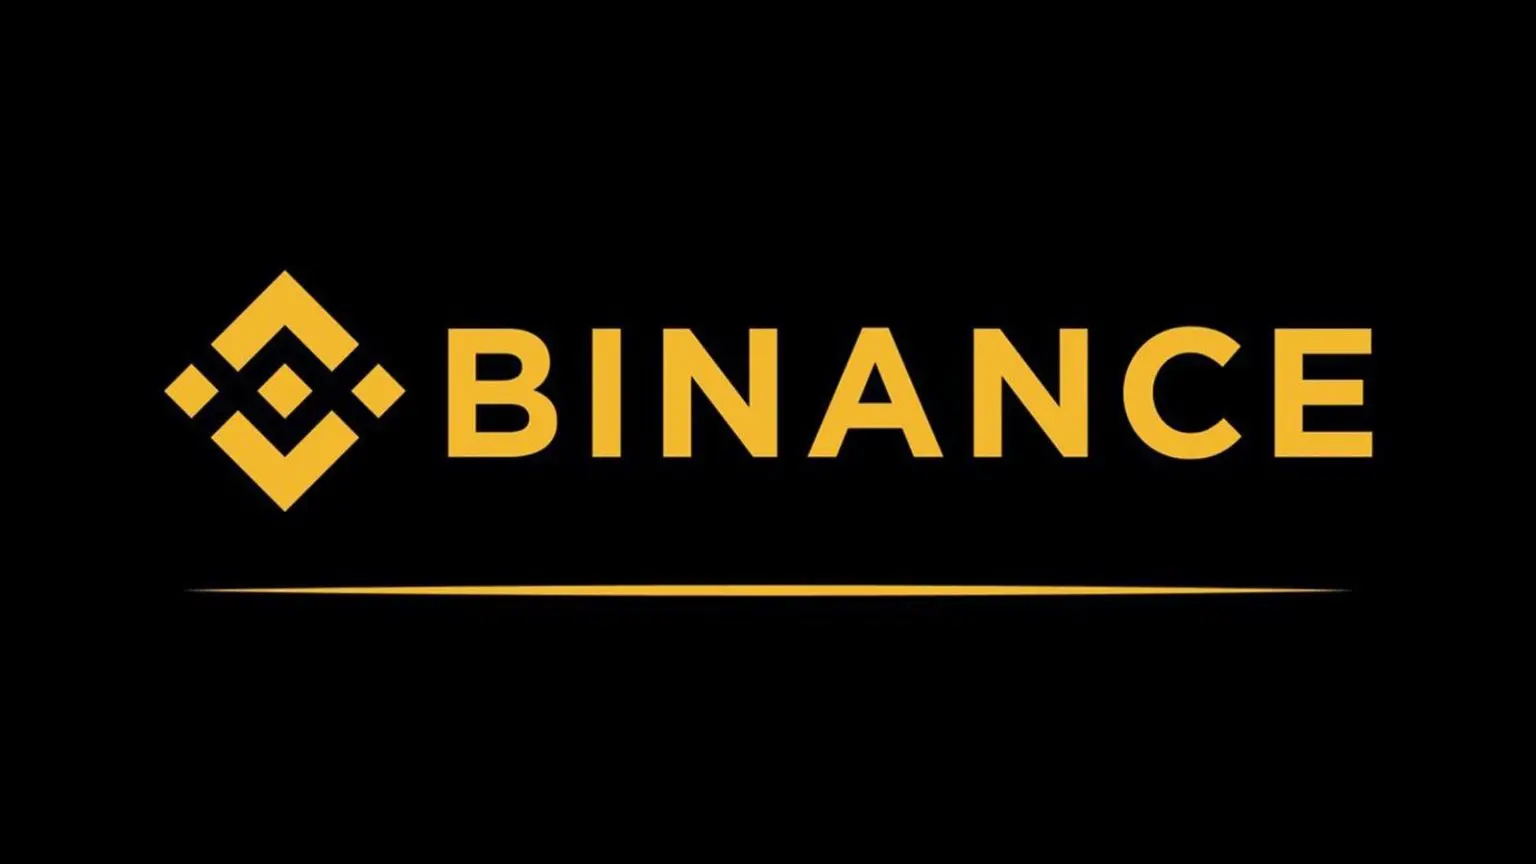 How Nigerian official requested $150m bribe from Binance – Report